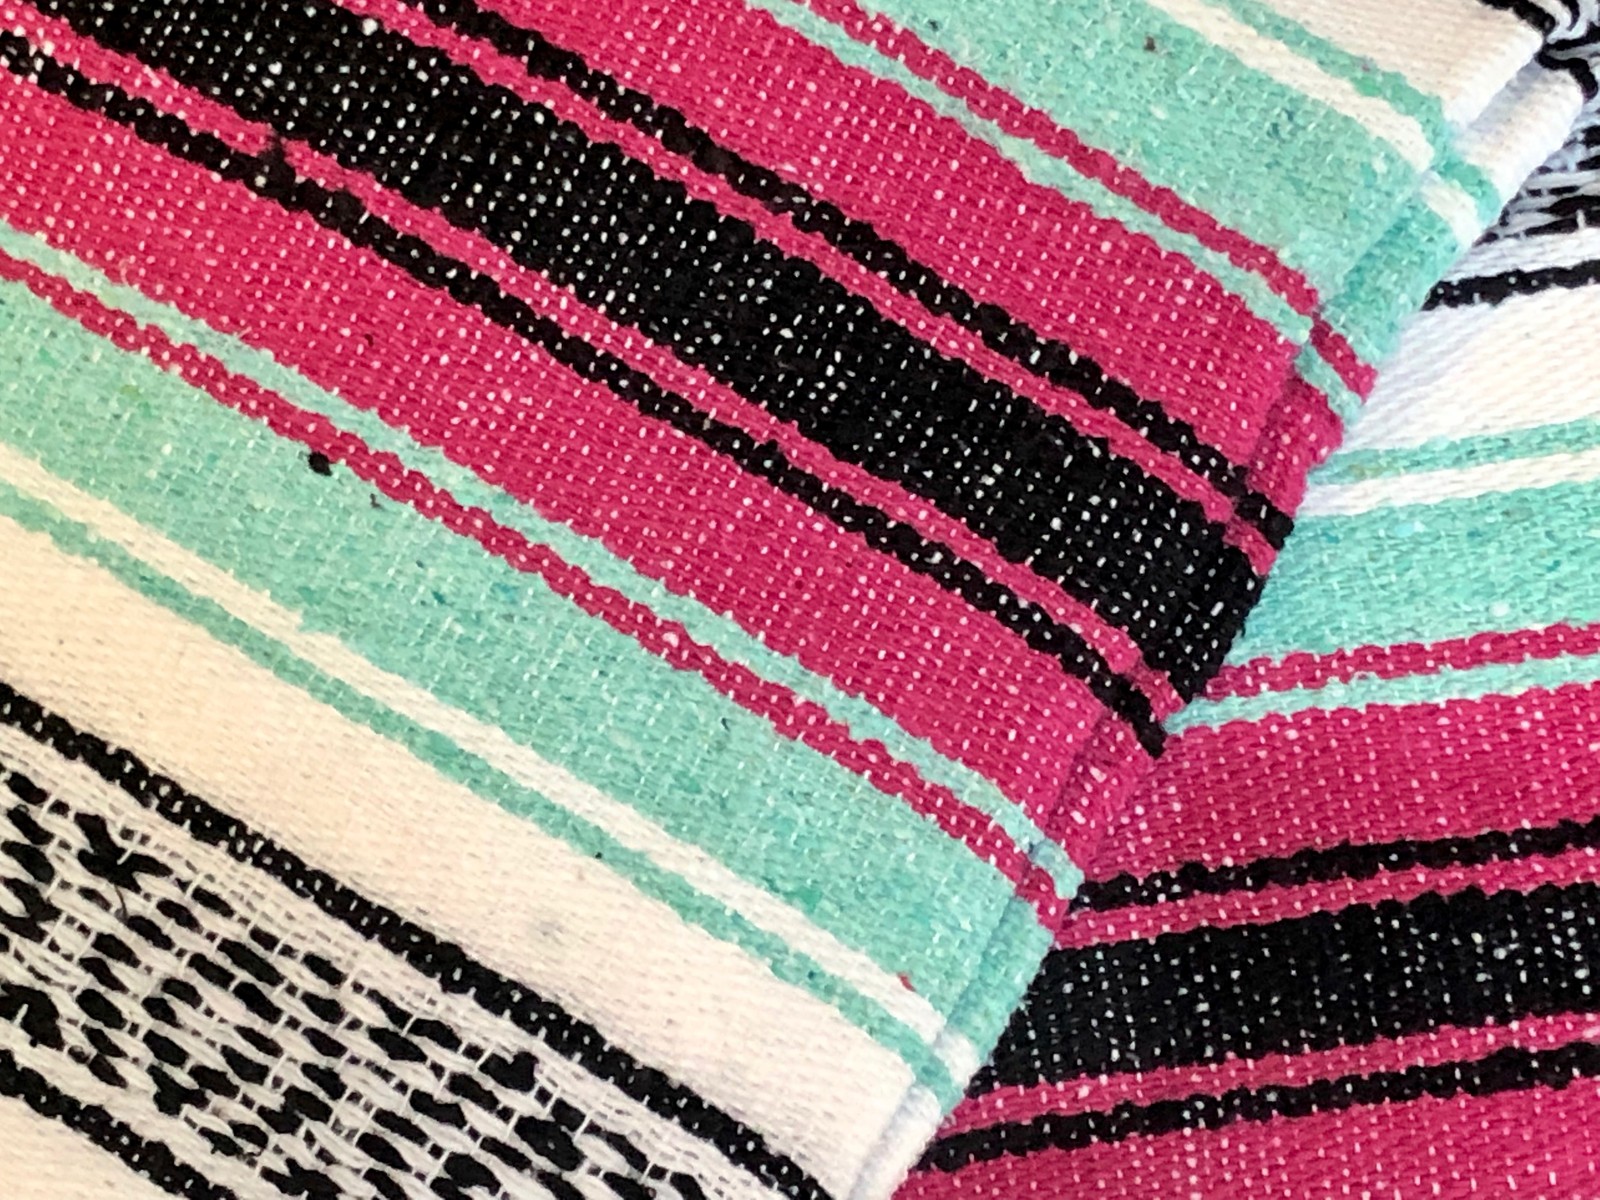 Mexitraders - Mexican Falsa Blankets 1.9x 1.2m - click for colour options